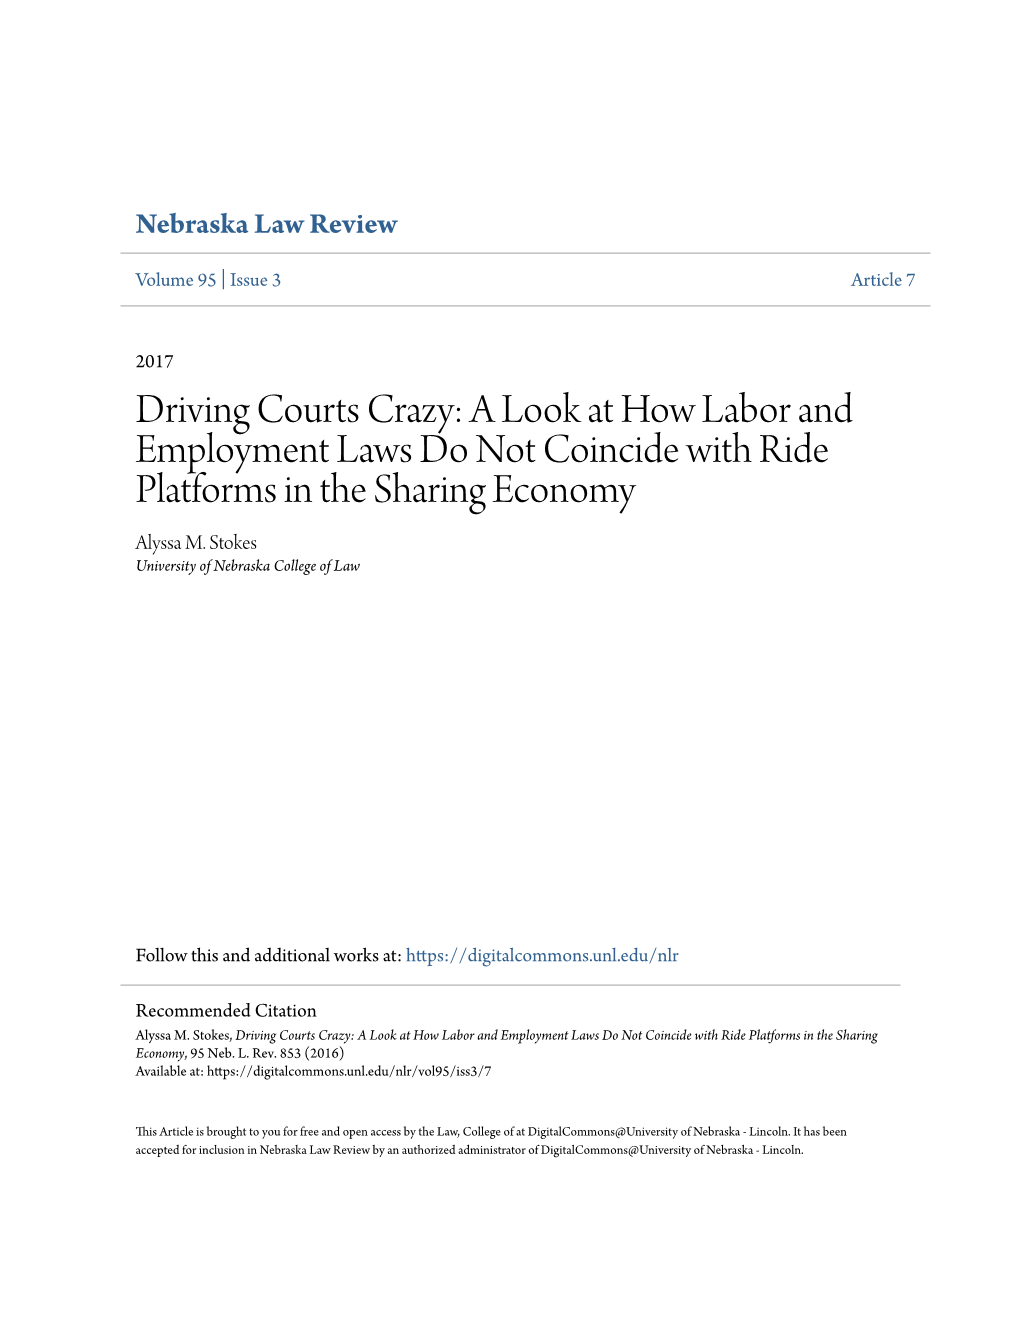 Driving Courts Crazy: a Look at How Labor and Employment Laws Do Not Coincide with Ride Platforms in the Sharing Economy Alyssa M